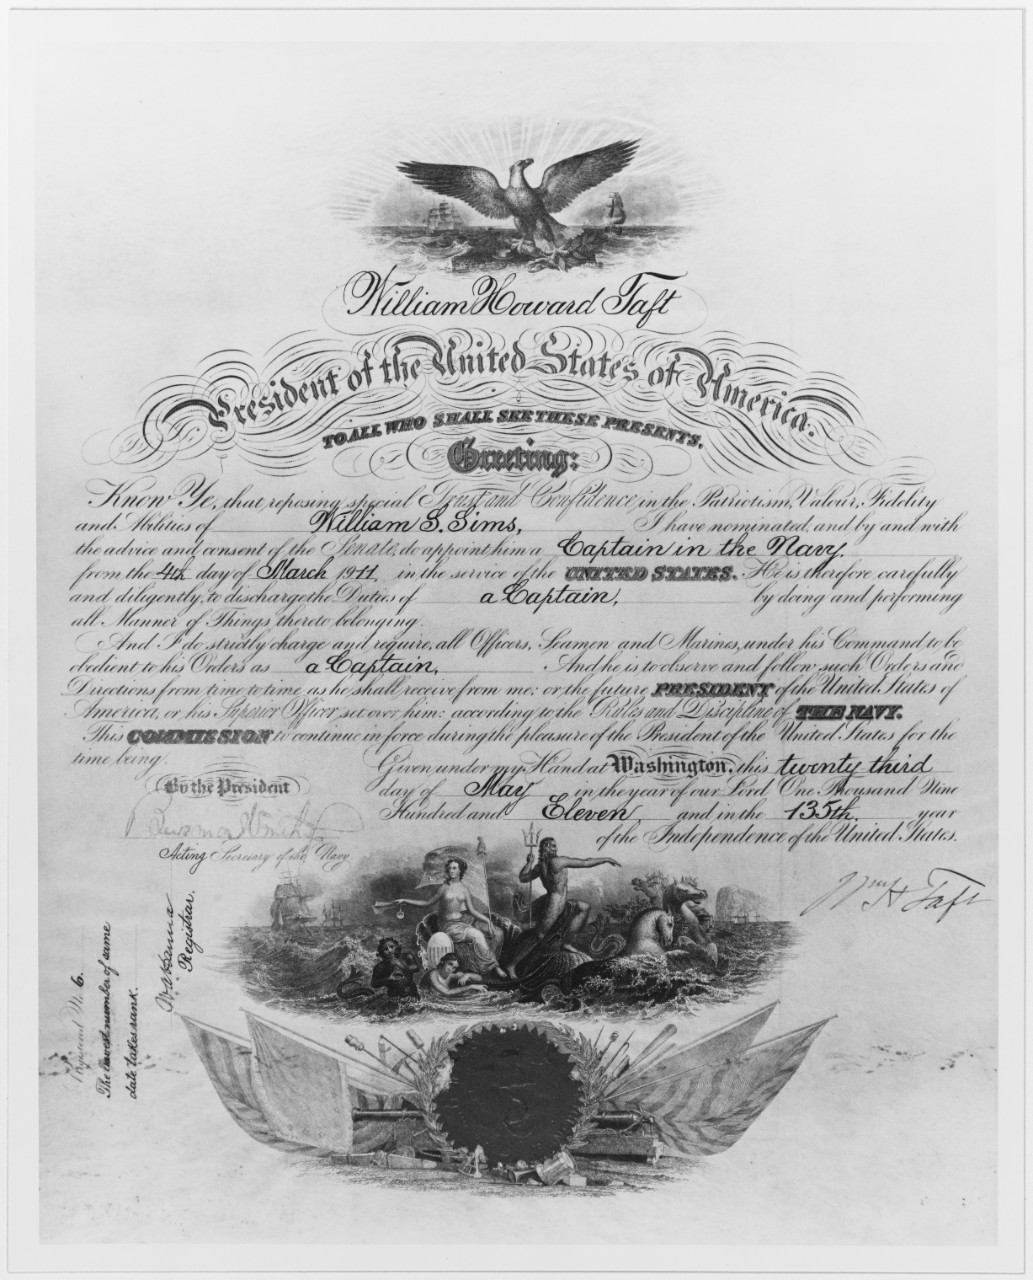 Commissioning certificate for William S. Sims, as Captain in the Navy